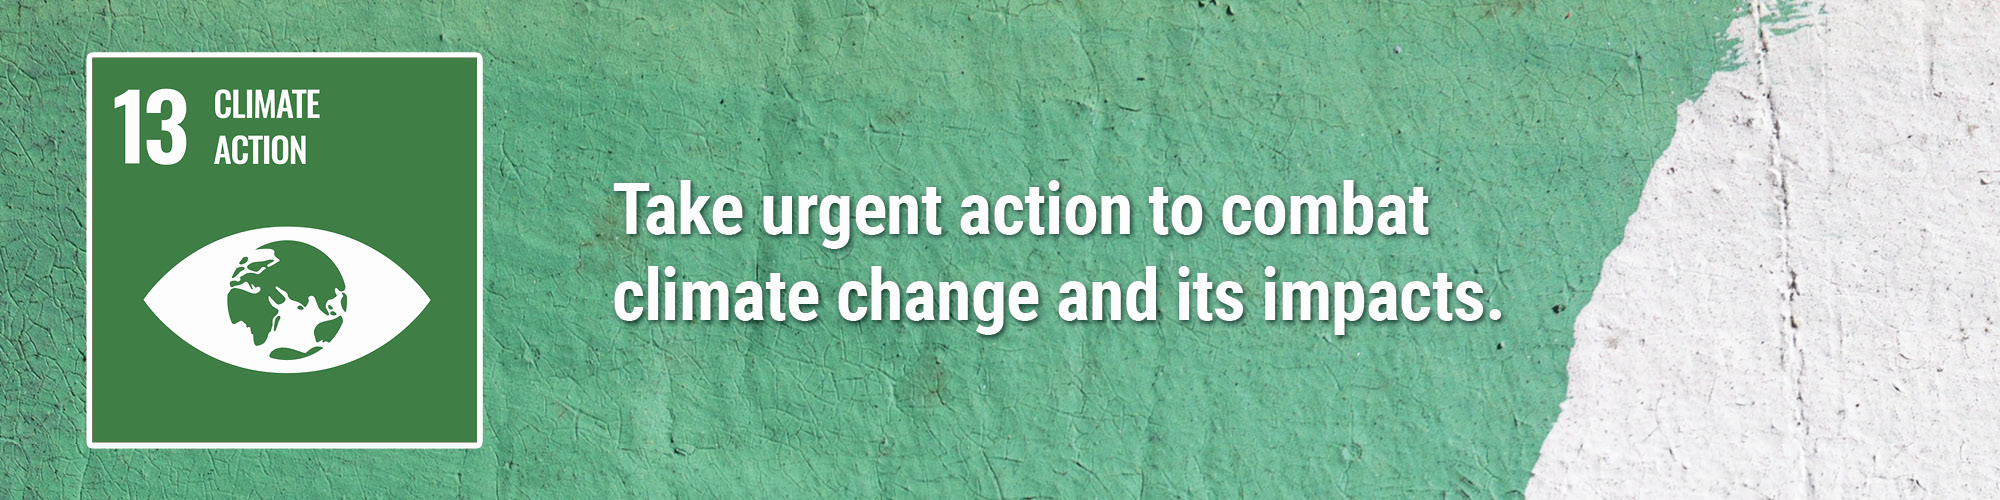 Take urgent action to combat climate change and its impacts*